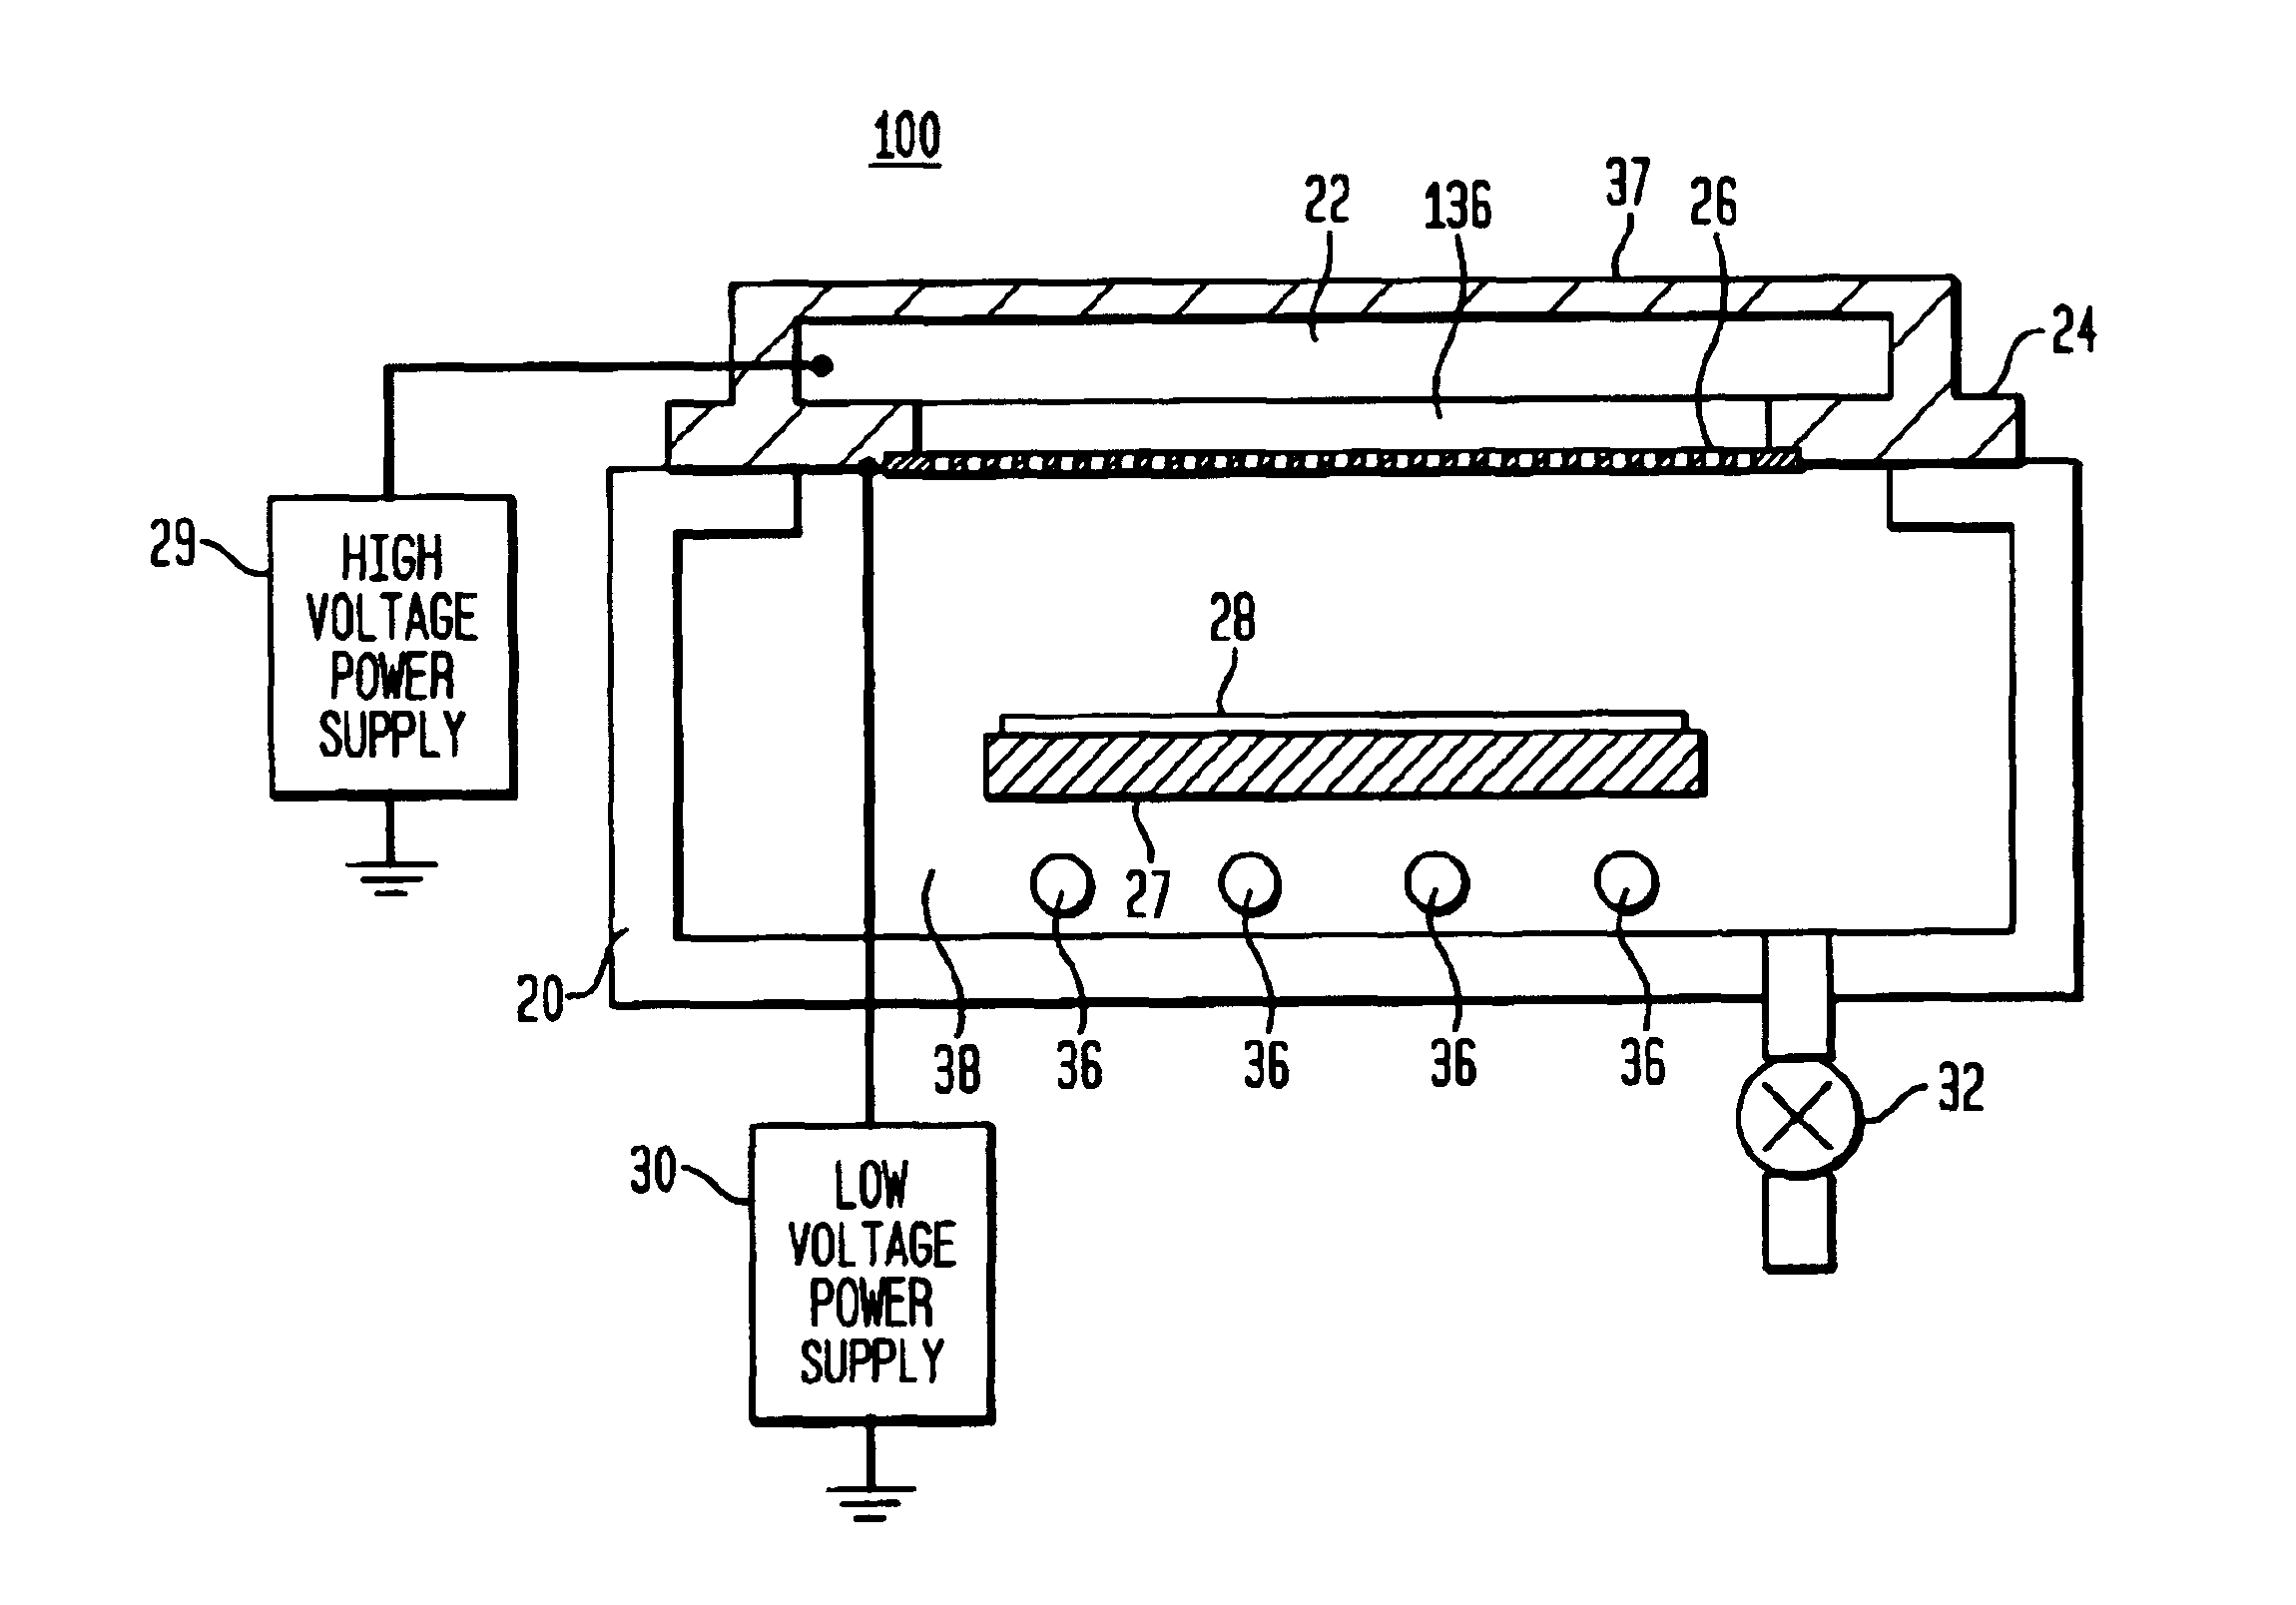 Methods and apparatus for E-beam treatment used to fabricate integrated circuit devices